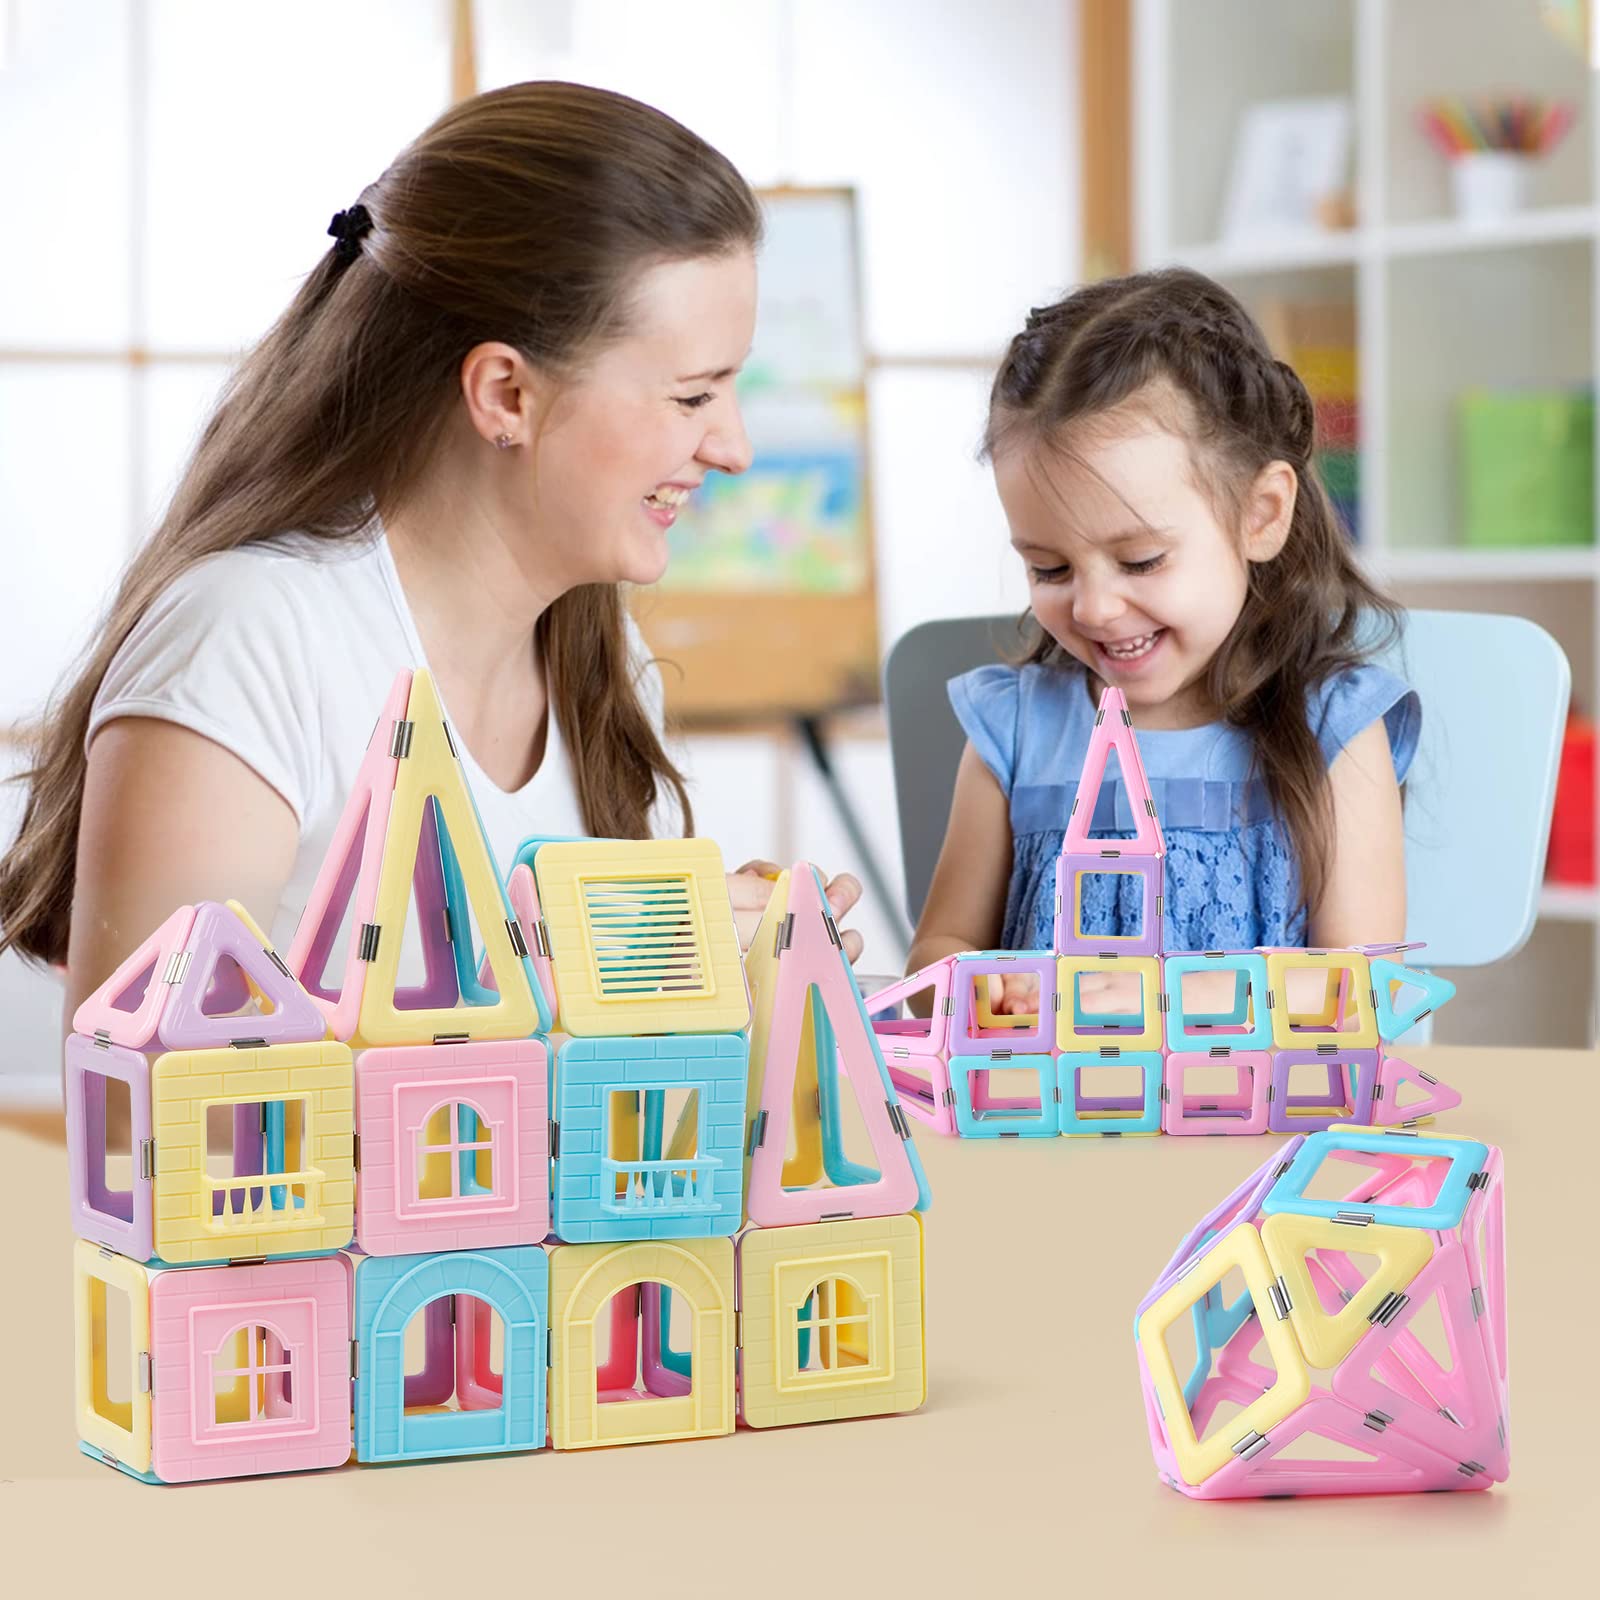 Magnetic Tiles Building Blocks Toys for Kids, 136 Pieces 3D Creative Castle Construction Magnetic Stacking Set Preschool Intelligence STEM Toys for Girls Boys Age 3years and Up (Macaron Color)